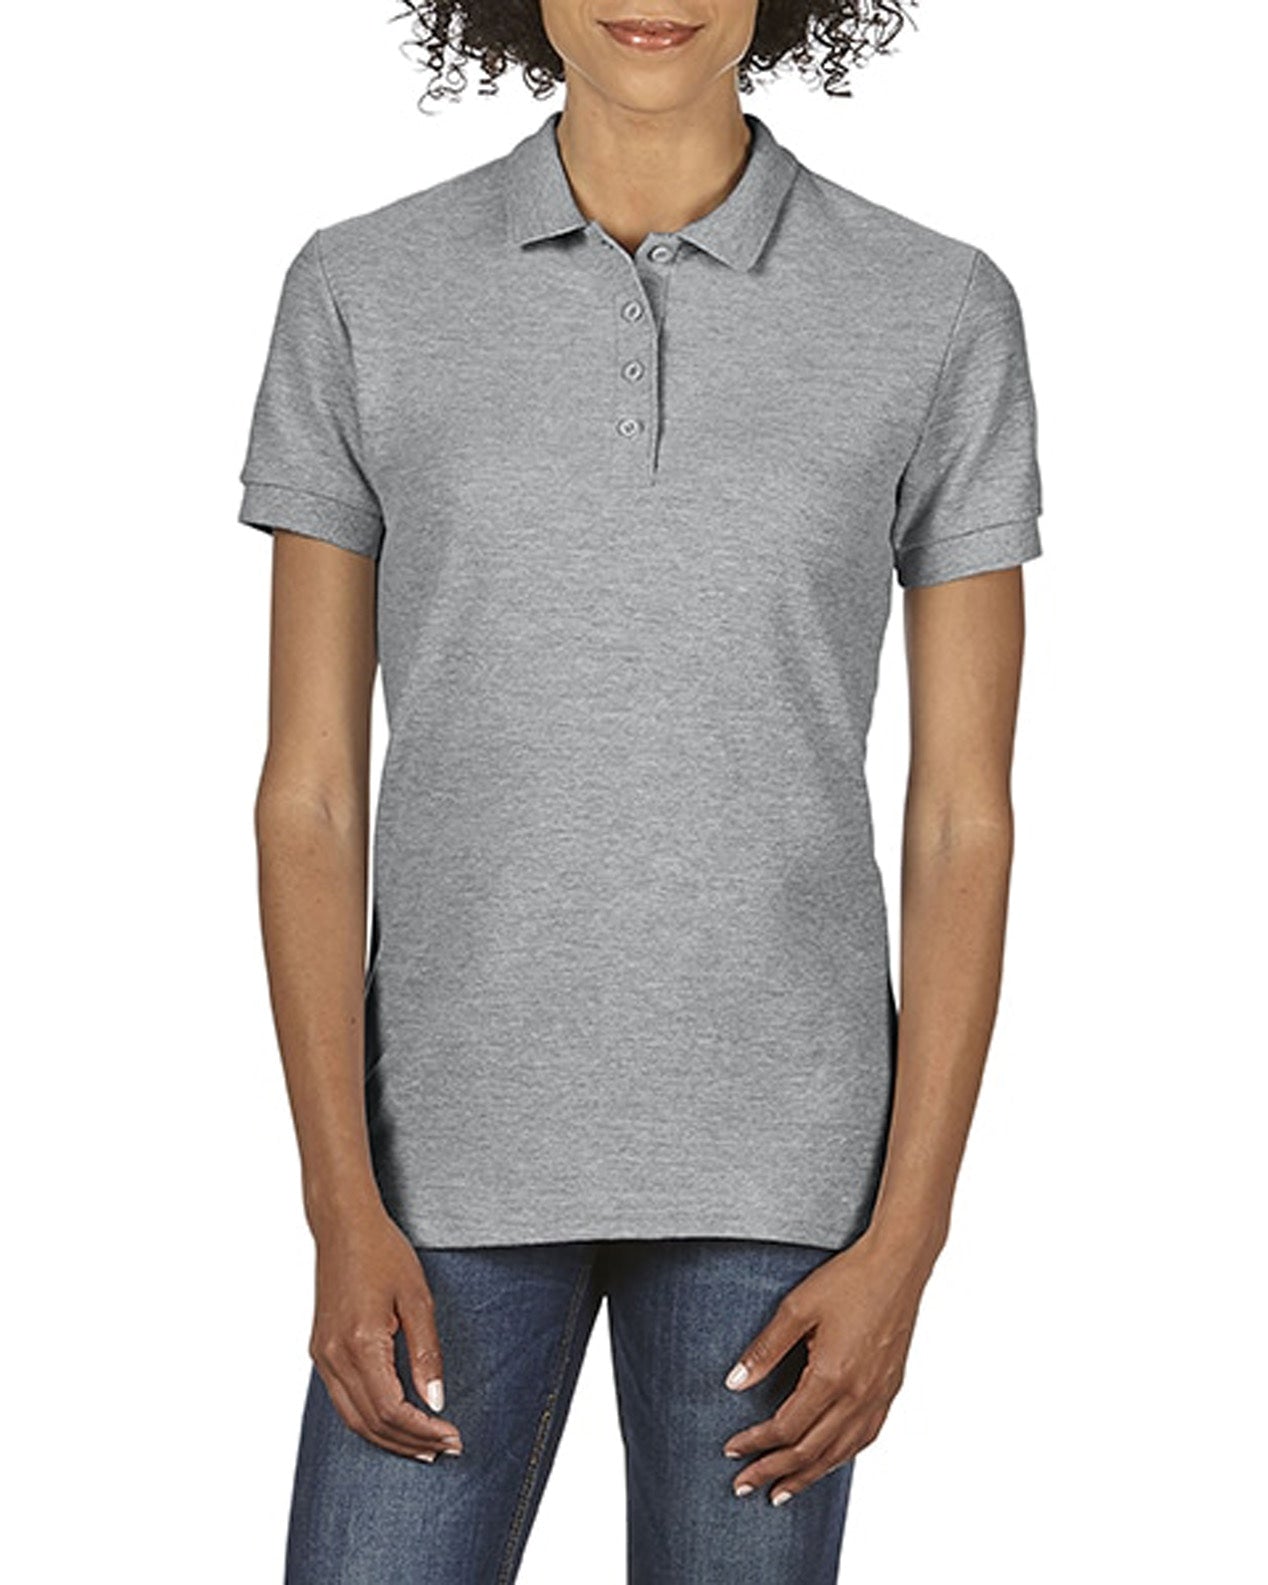 Ladies Softstyle Double Pique Polo